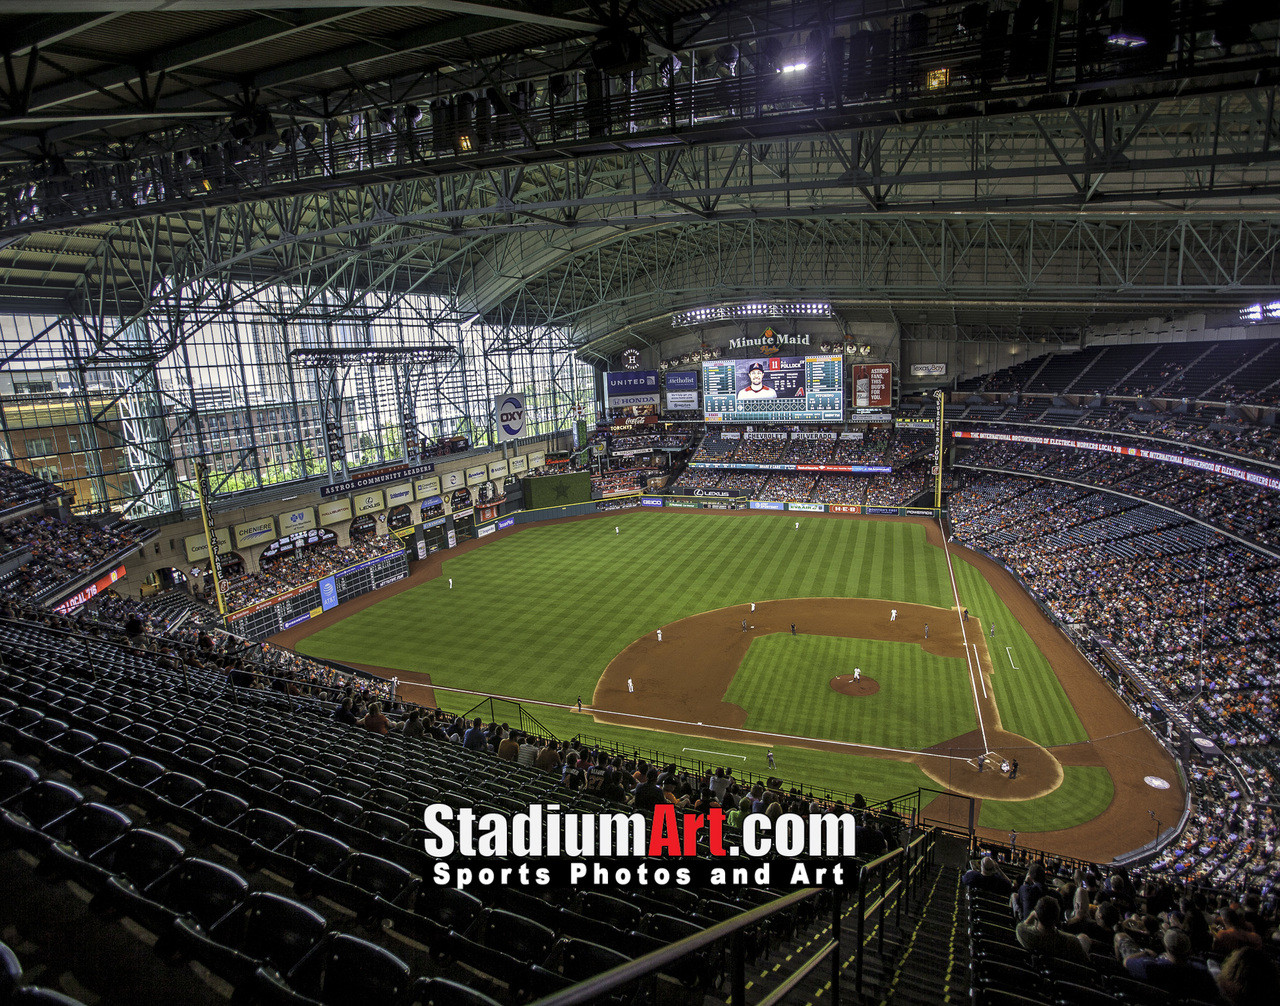 Houston Astros extend Minute Maid Park's official team store hours